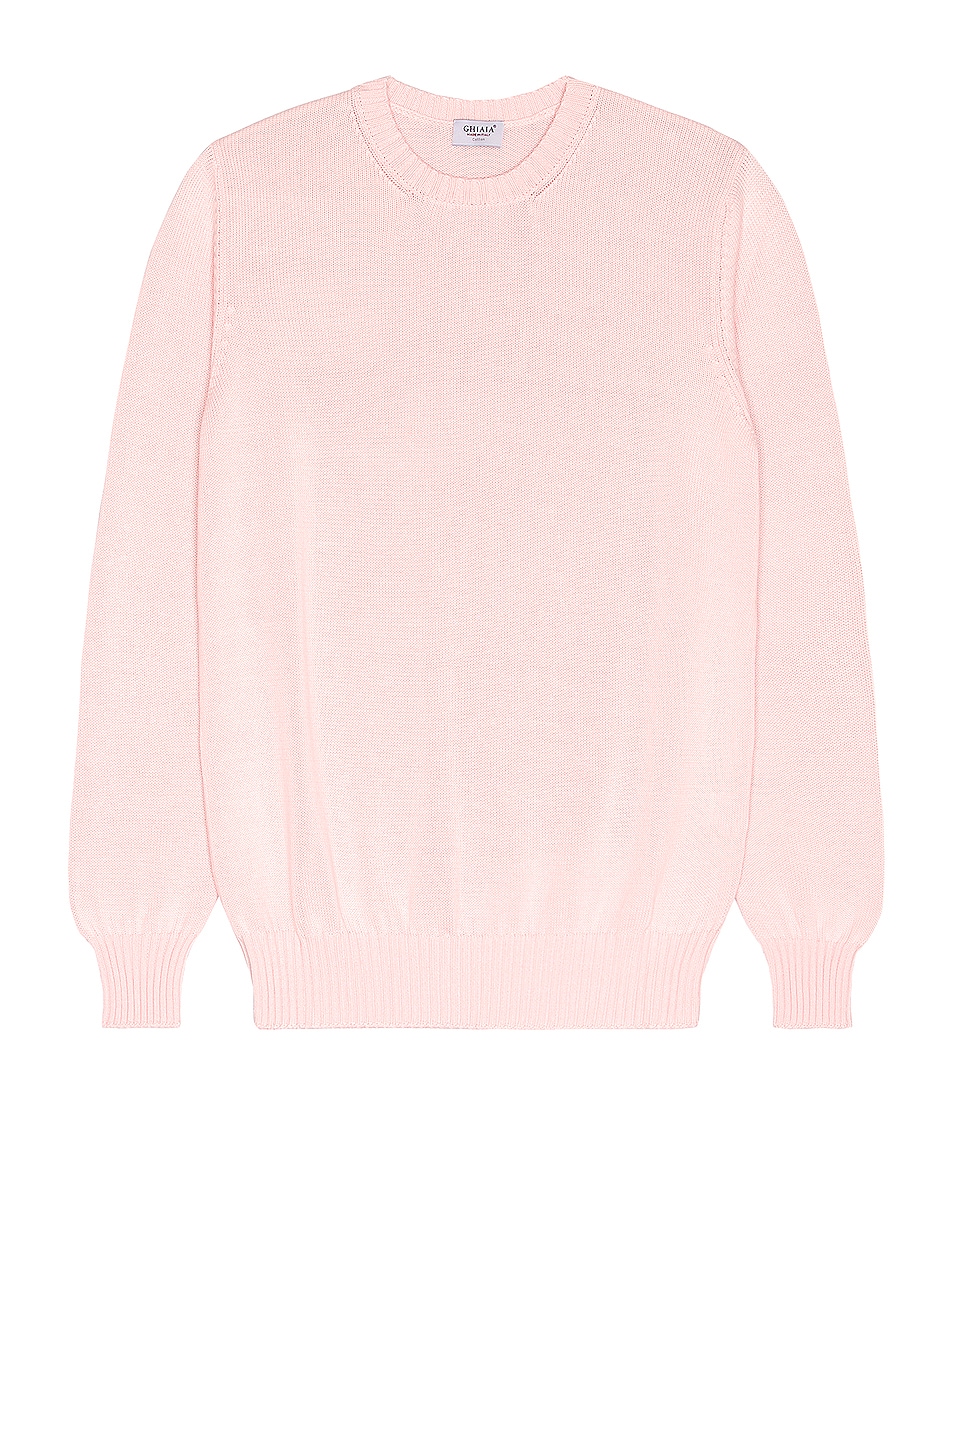 Image 1 of Ghiaia Cashmere Cotton Crewneck in Pink